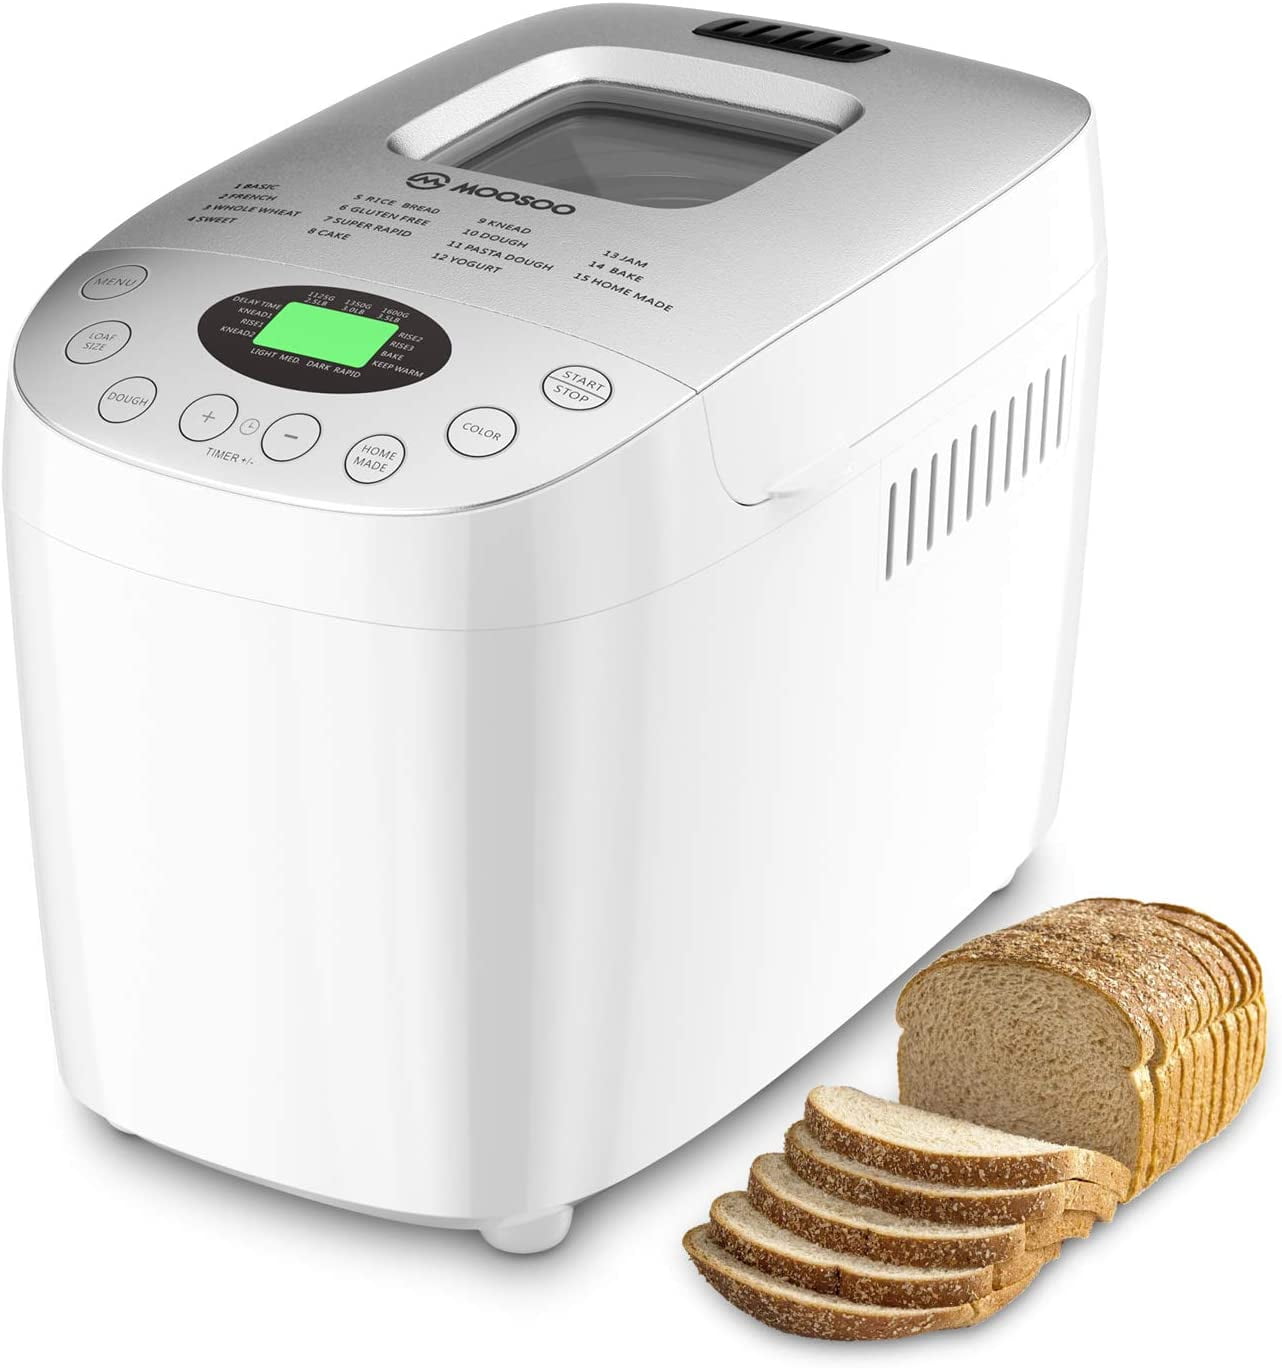 Courant Bread Maker Machine 3 Loaf sizes, Gluten-free, sugar-free, Natural  Sourdough, Total 15 Pre-Programmable Cycles, Delay Timer, Easy to Use, Warm